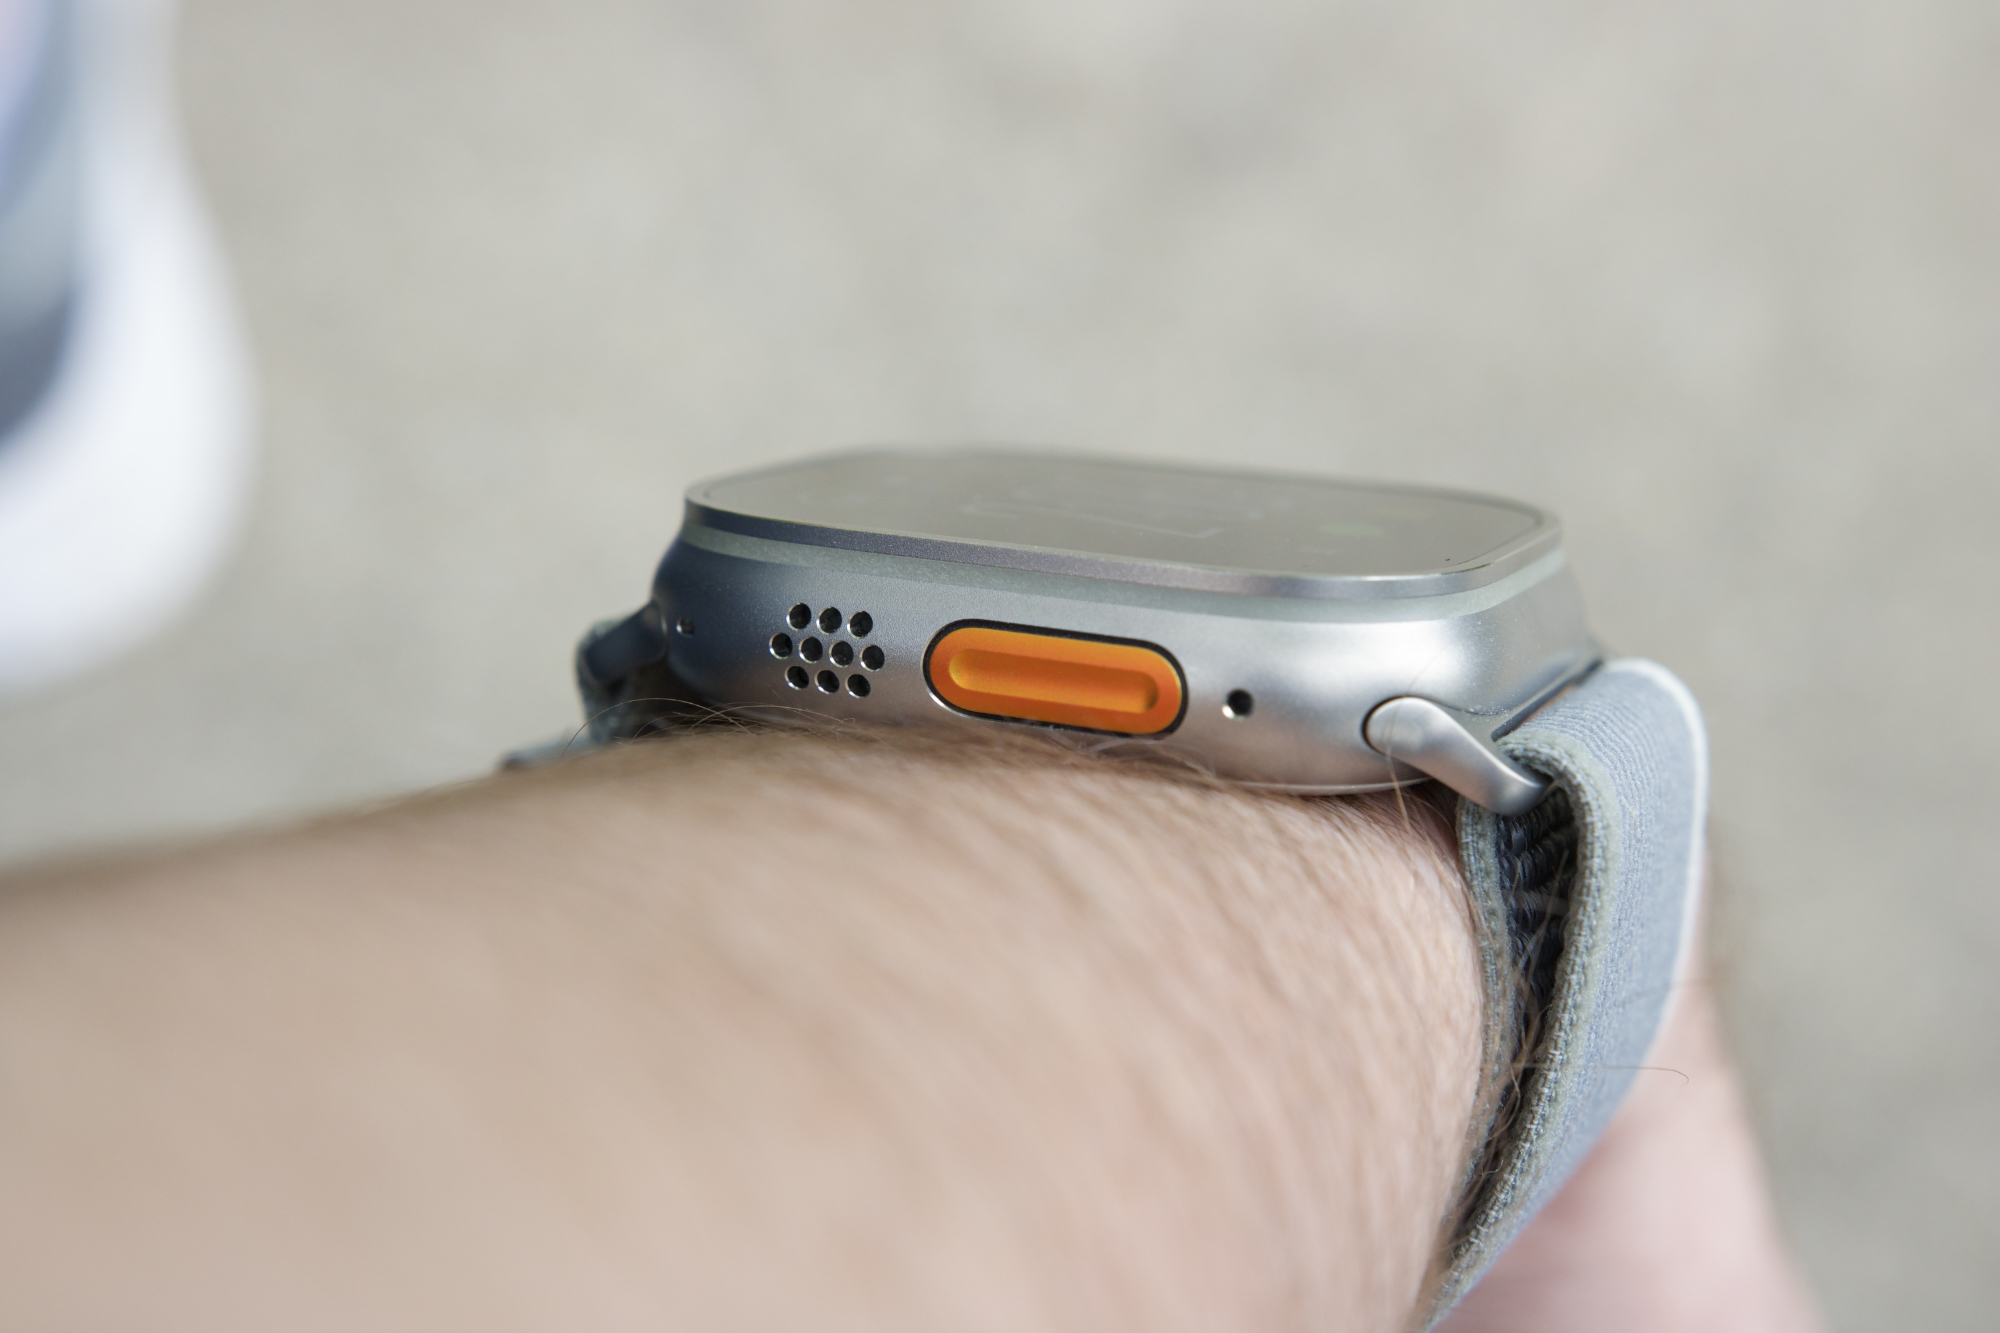 Apple Watch Ultra 2: Should You Buy? Reviews, Features and More